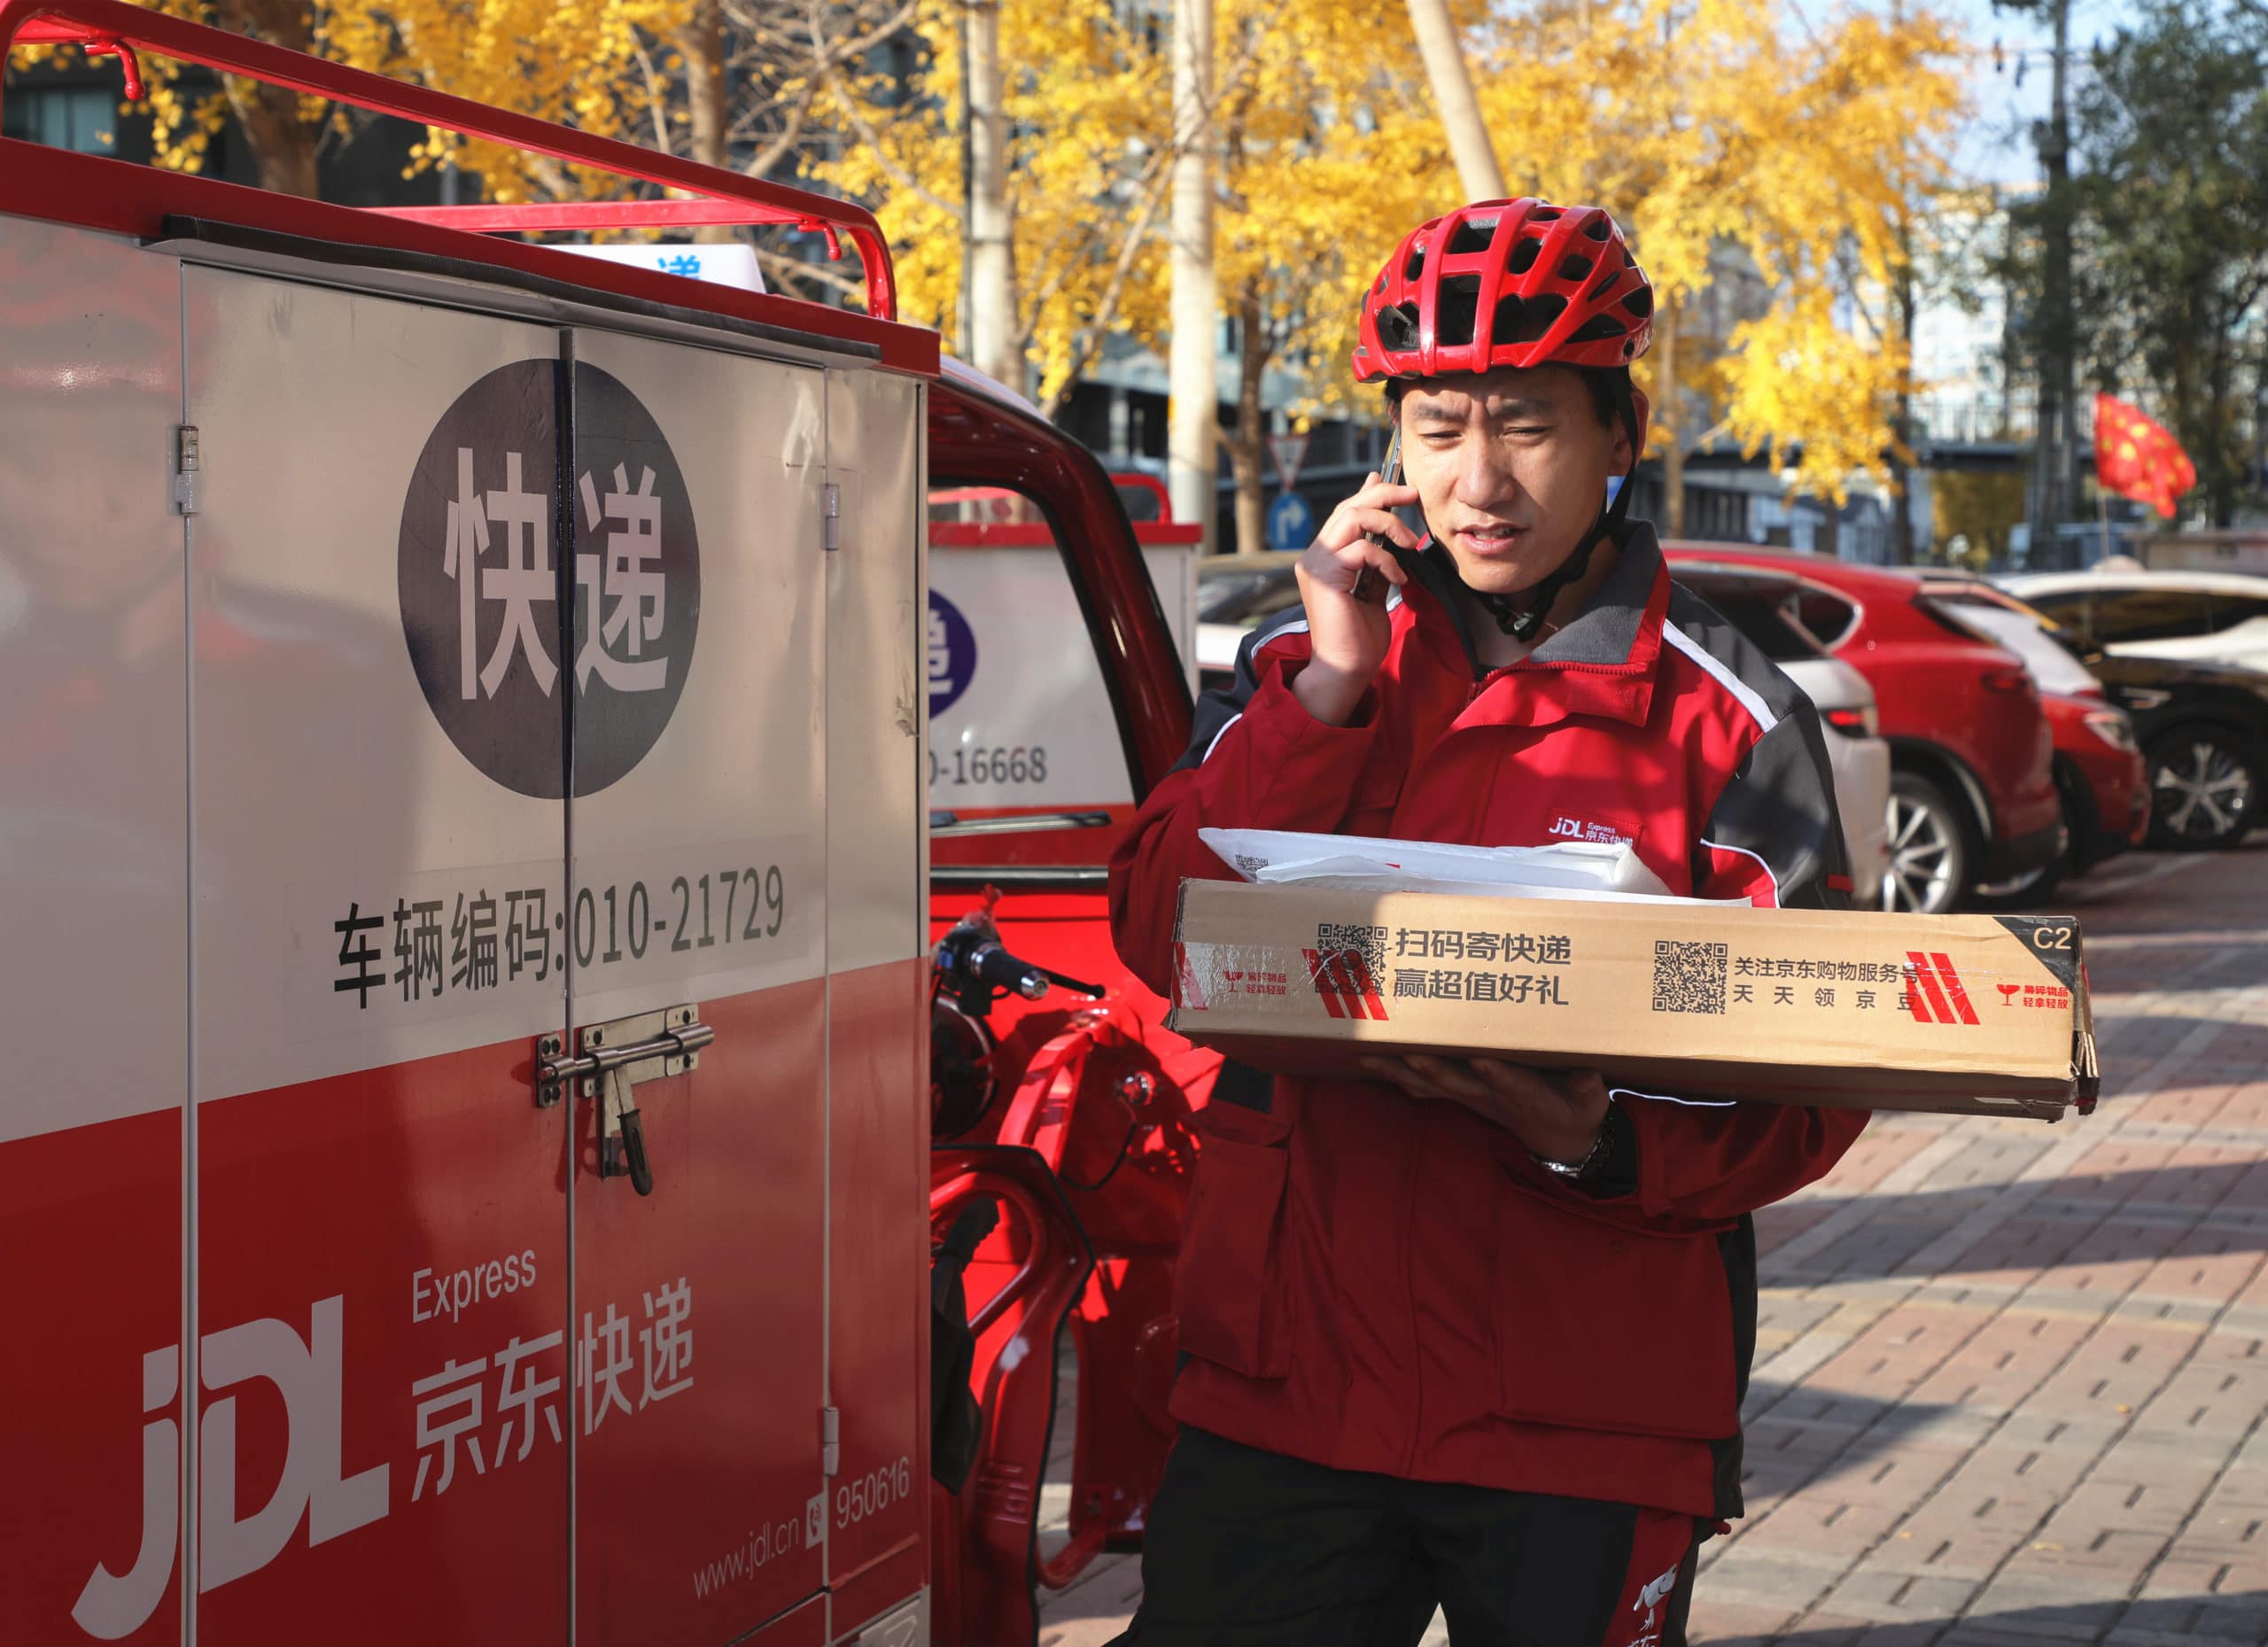 Today, Song, aged 38, heads one of 21 delivery stations in Beijing’s Zhongguancun neighborhood